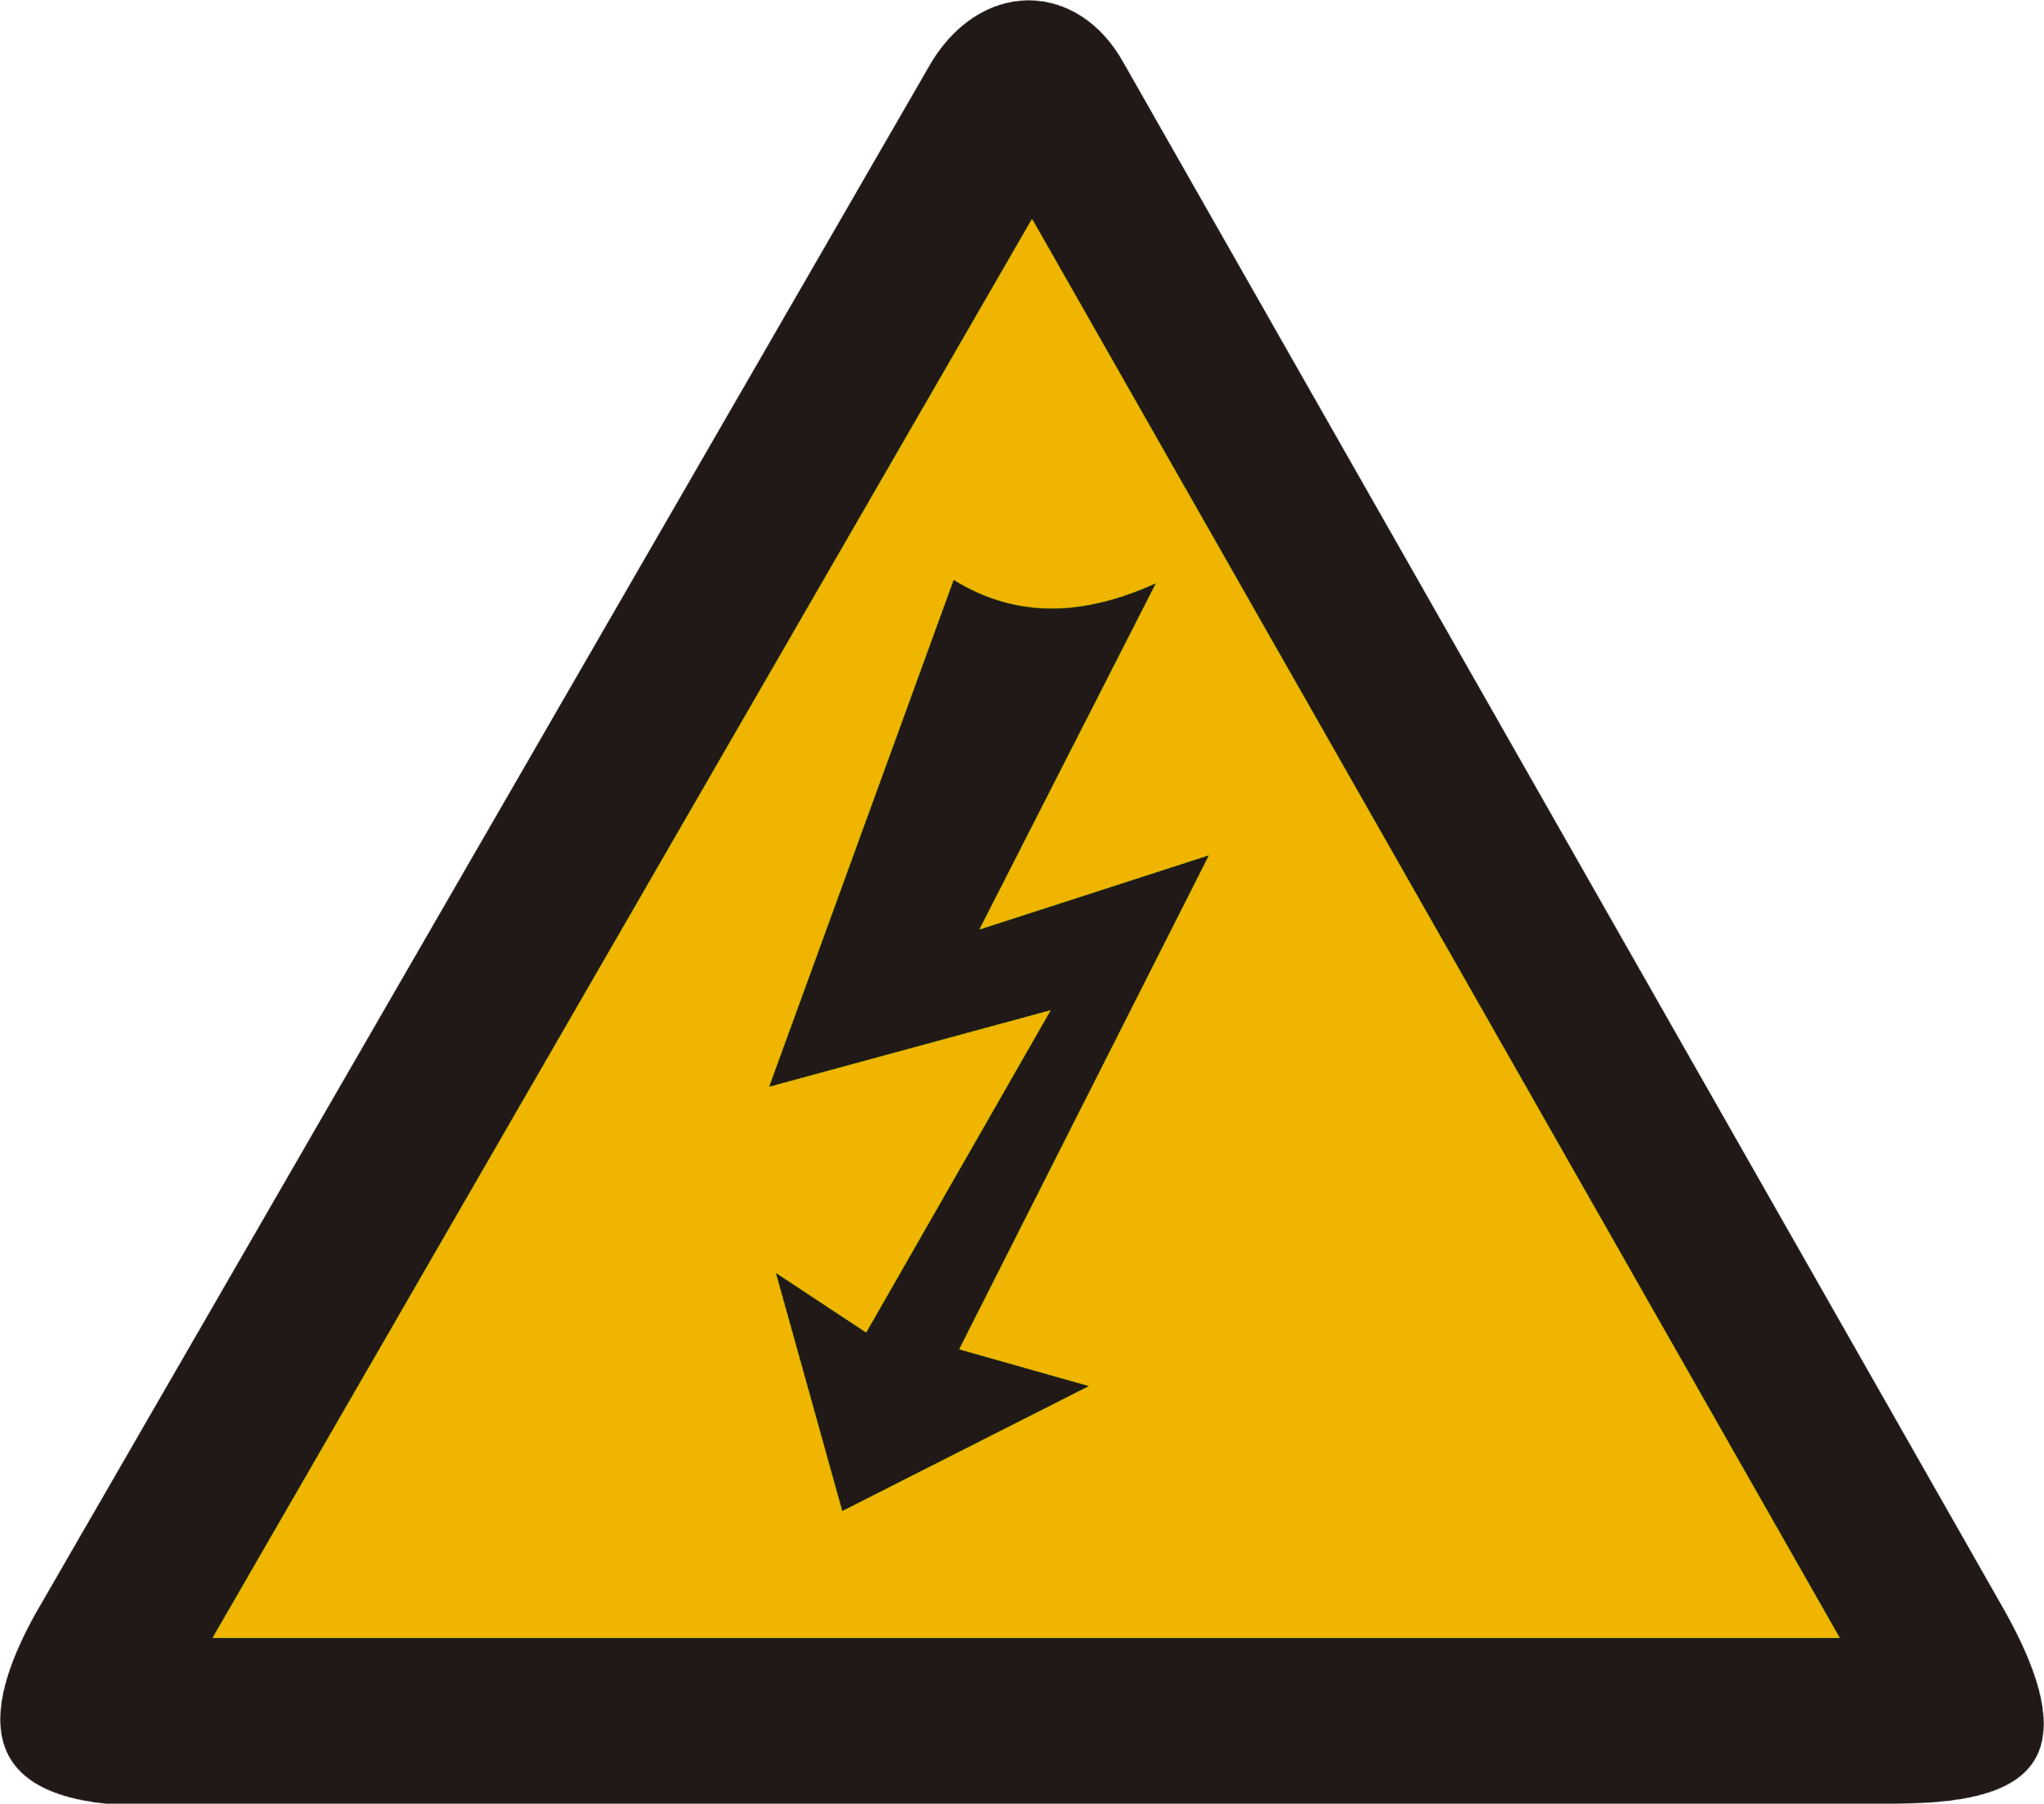 warning-signs-danger-free-cliparts-that-you-can-download-to-you-i0hVnd-clipart.gif